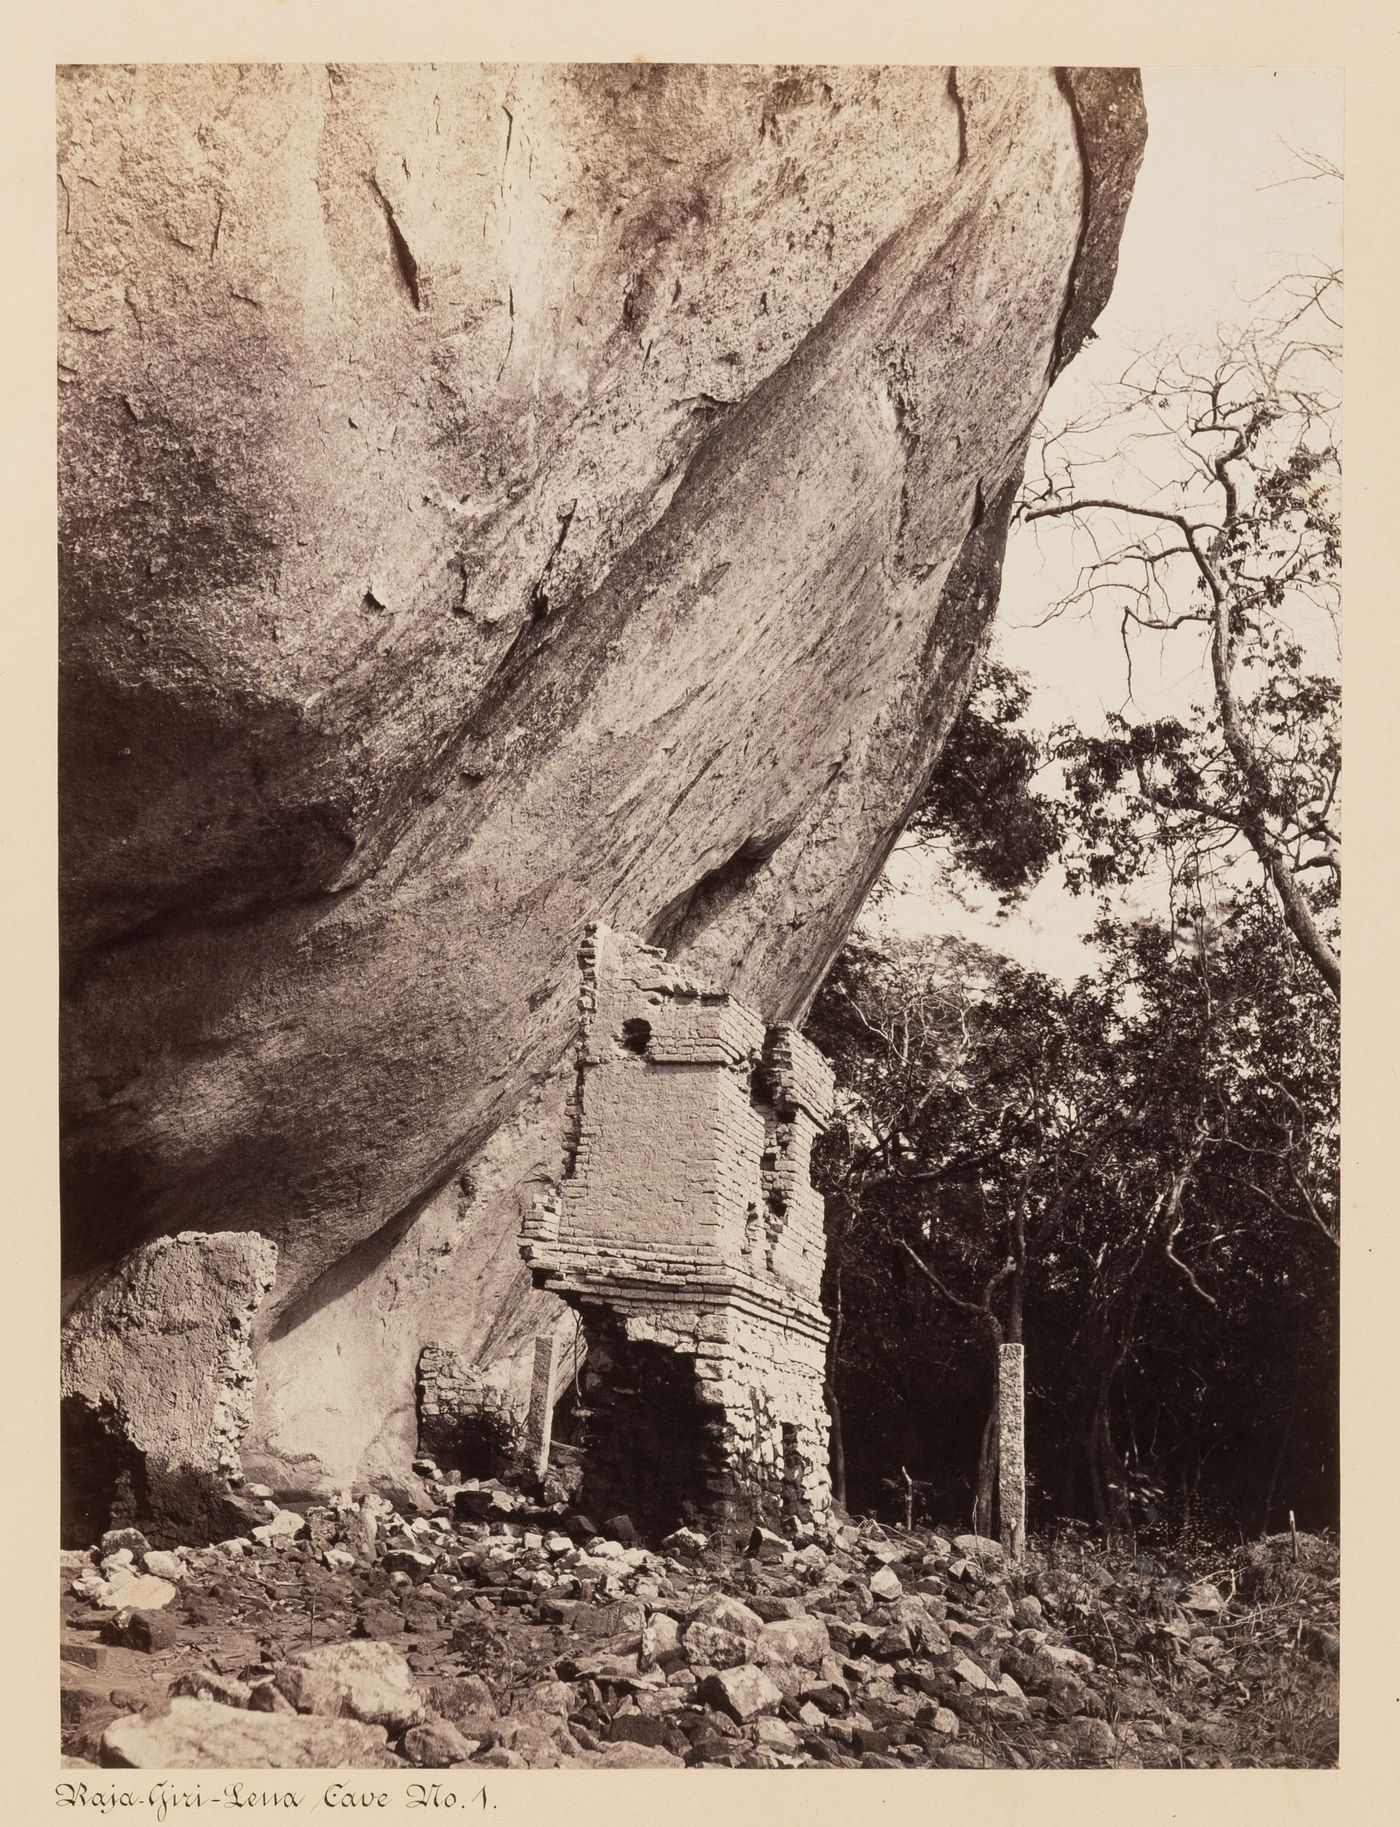 View of the ruins of a brick building, possibly known as Cave No. 1, Raja-Giri-Lena (also known as Raja-Giri-Lena-Kande and Care Mountain), Mihintale, Ceylon (now Sri Lanka)